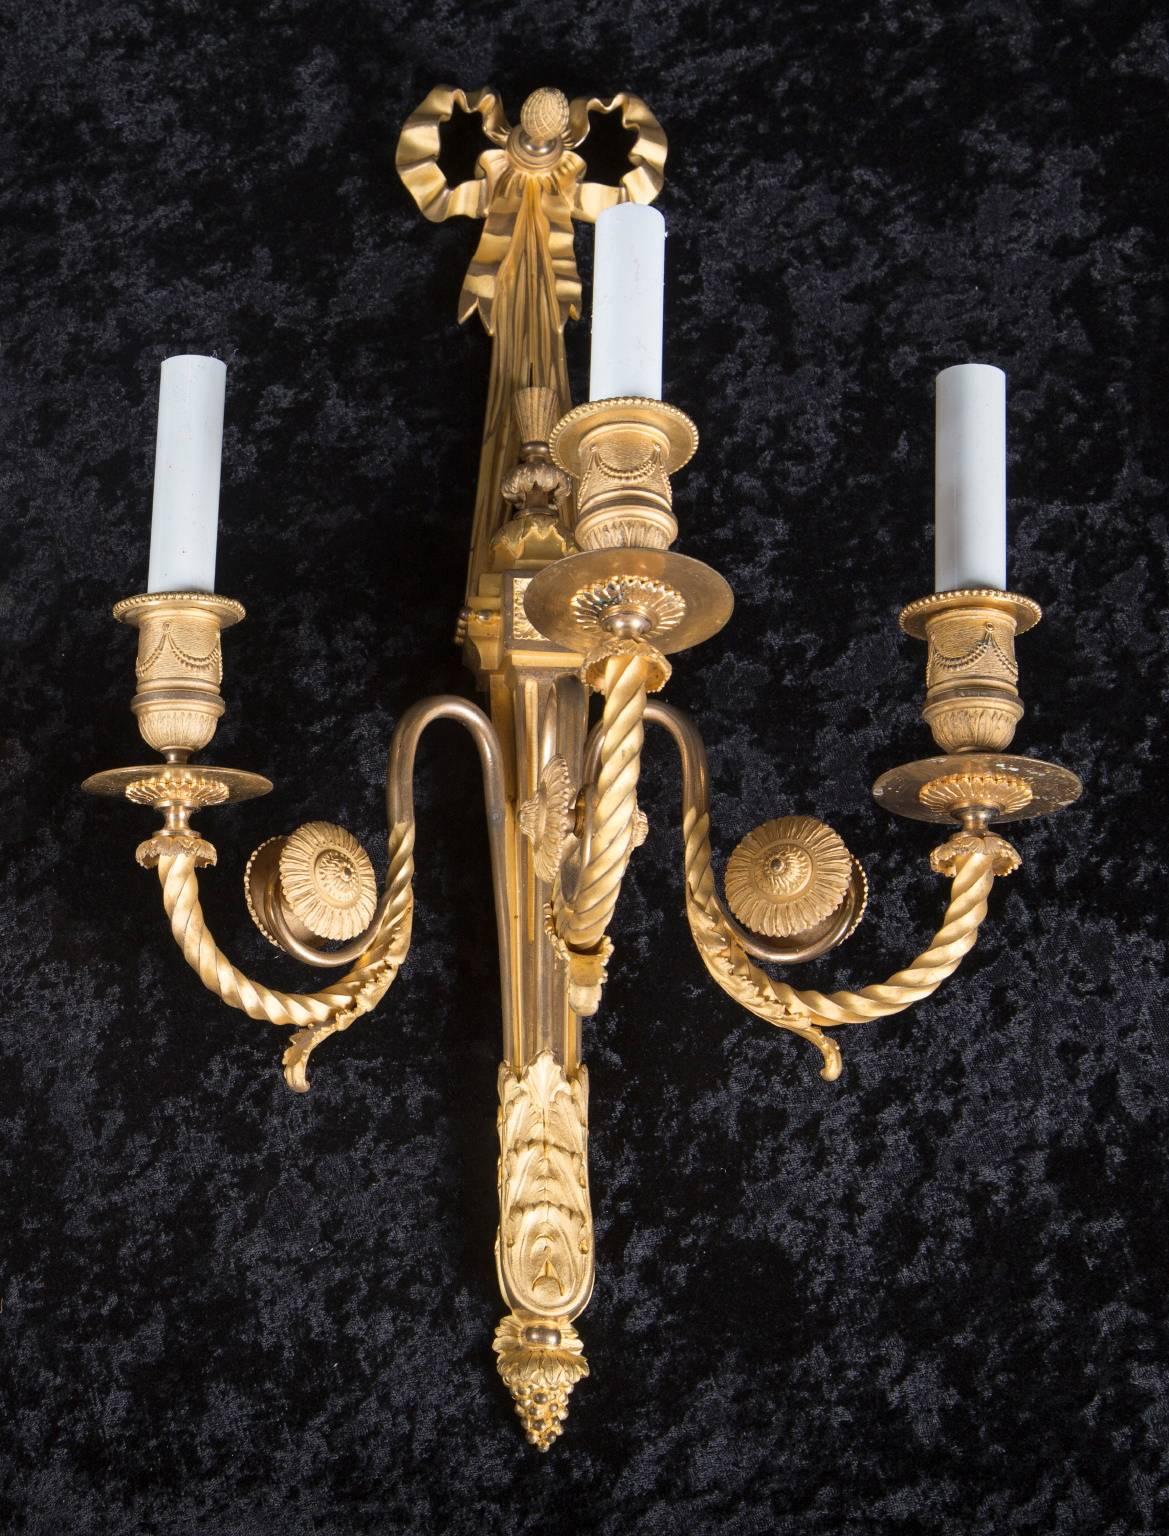 This pair of Louis XVI 3 light sconces are made of finely chiseled bronze d’ore and date back to the 19th century. The French Antique pair features beaded drippers, candle cups adorned with swags, and bobeches. The swirl arms are embellished with